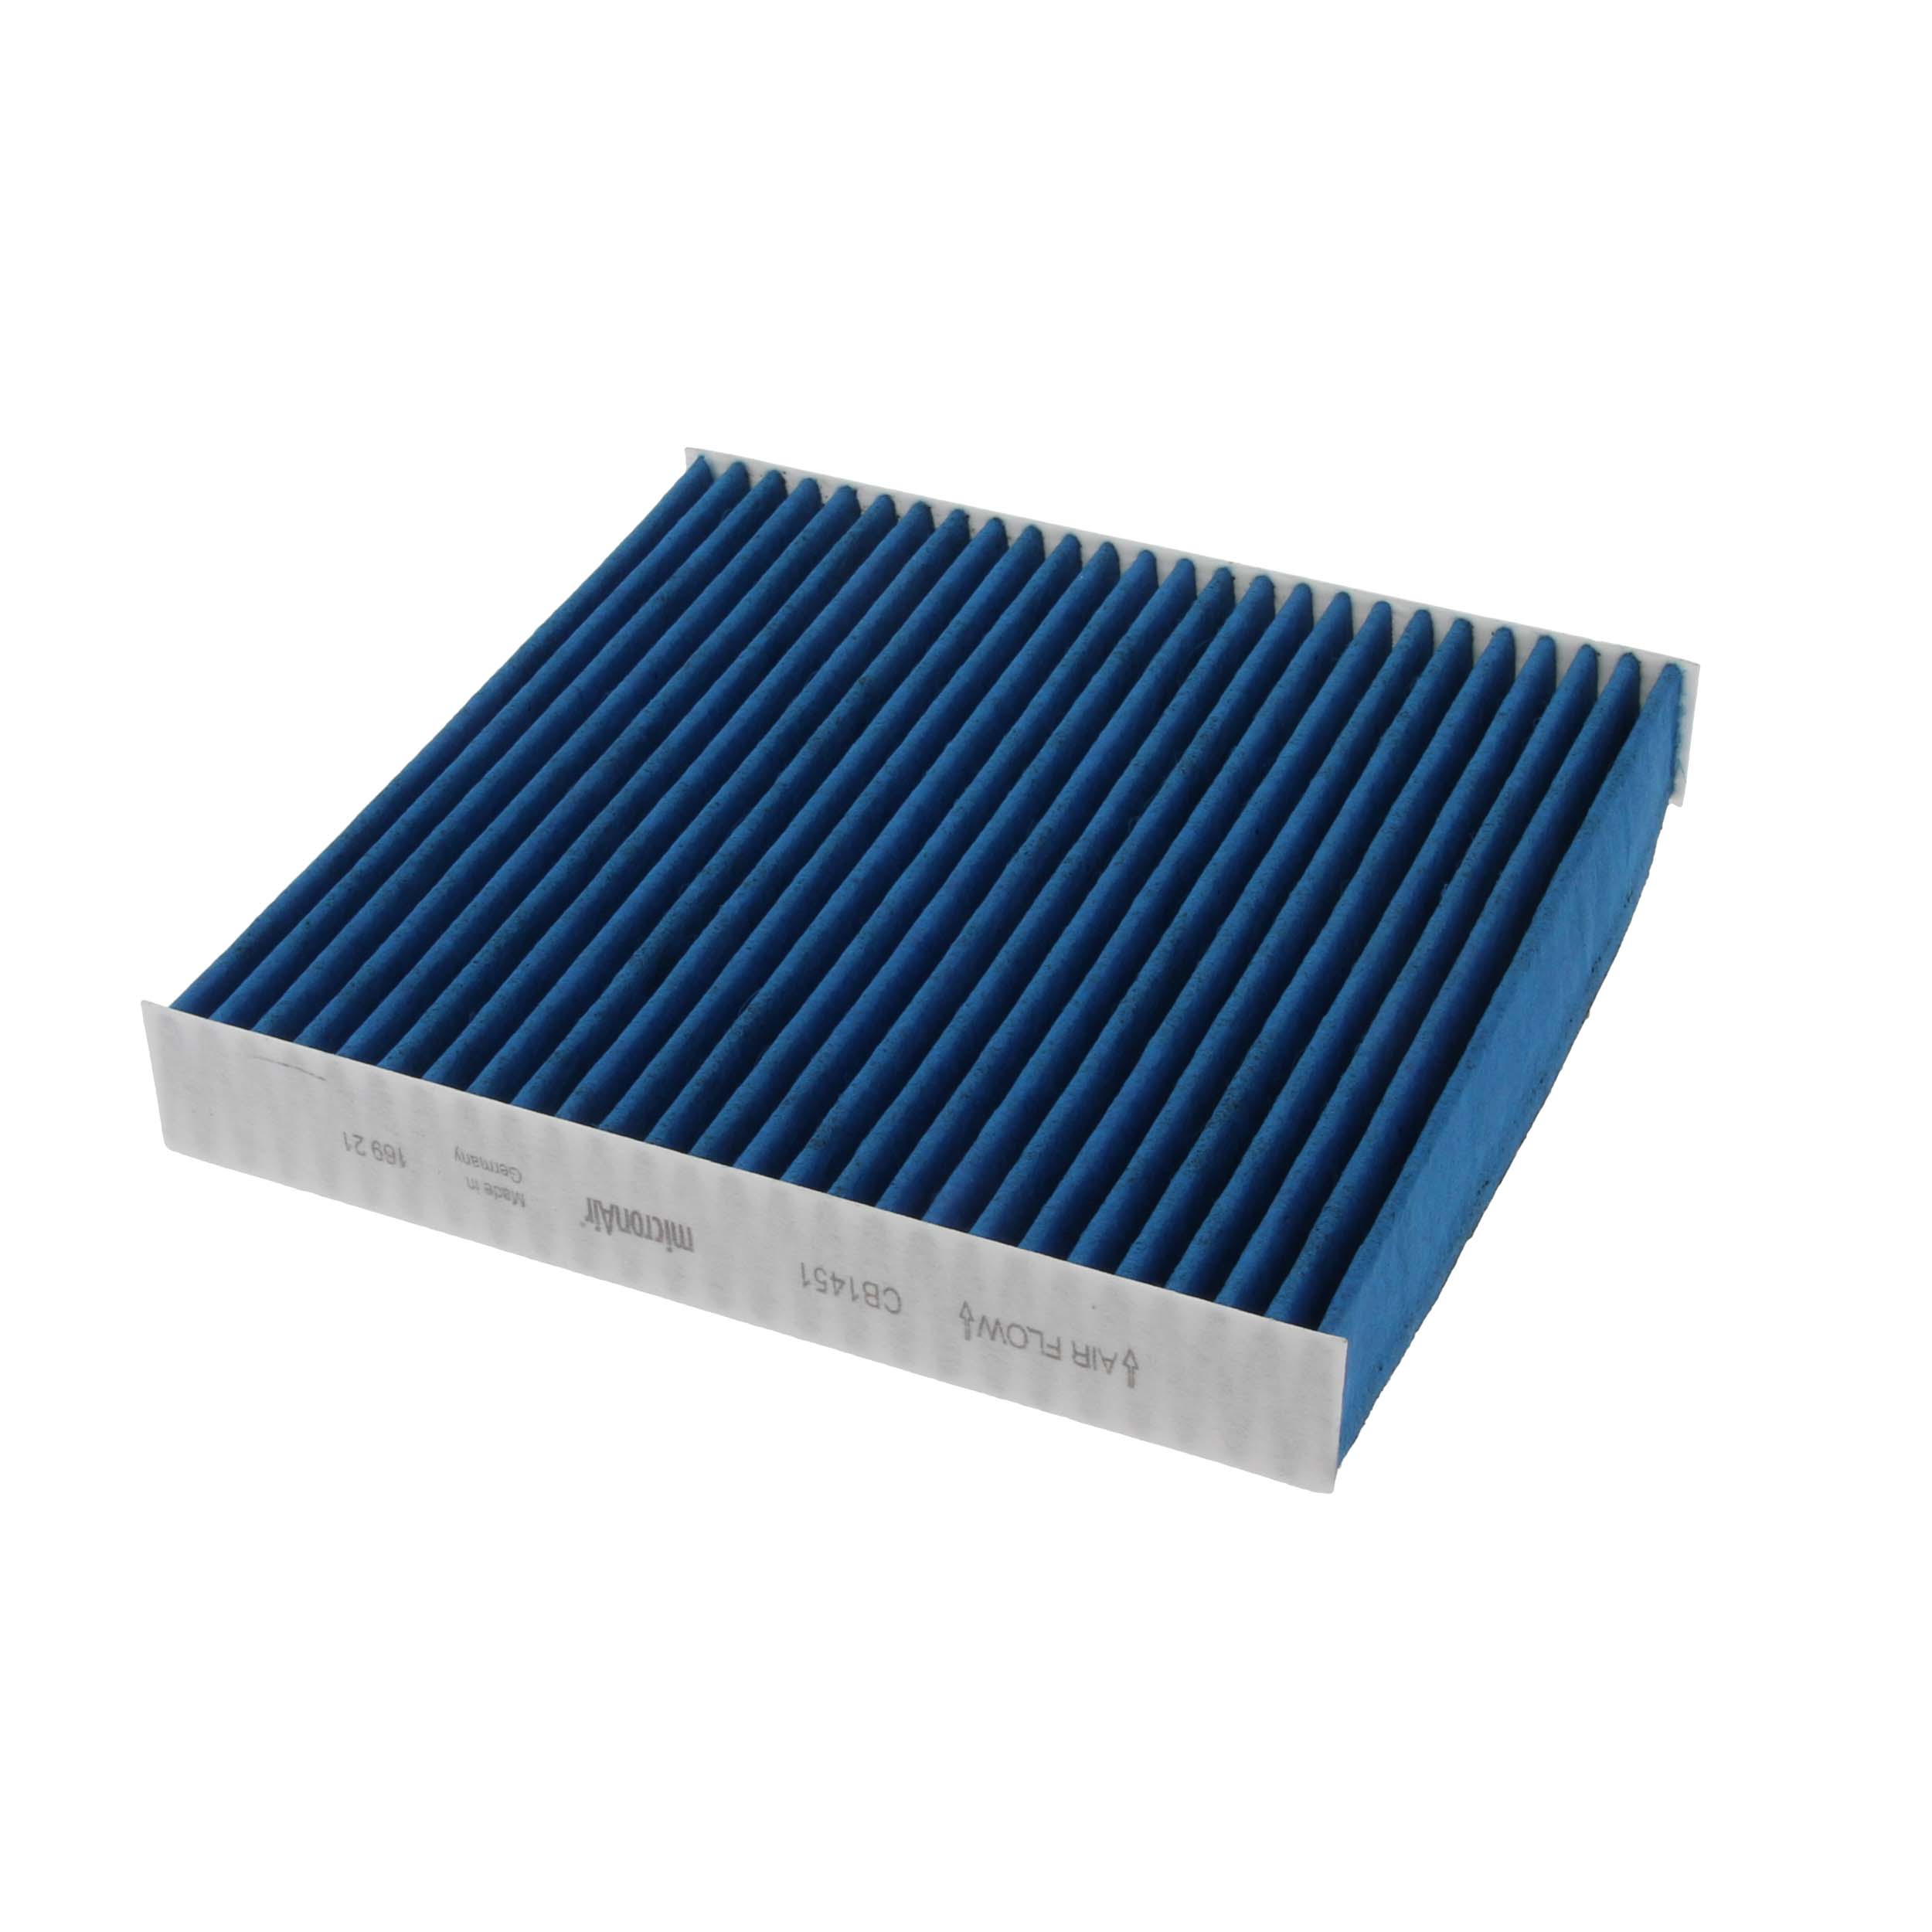 CB1451 CORTECO Particulate filter (PM 2.5), with anti-allergic effect, with antibacterial action, with fungicidal effect, 195 mm x 187 mm x 30 mm Width: 187mm, Height: 30mm, Length: 195mm Cabin filter 49408808 buy